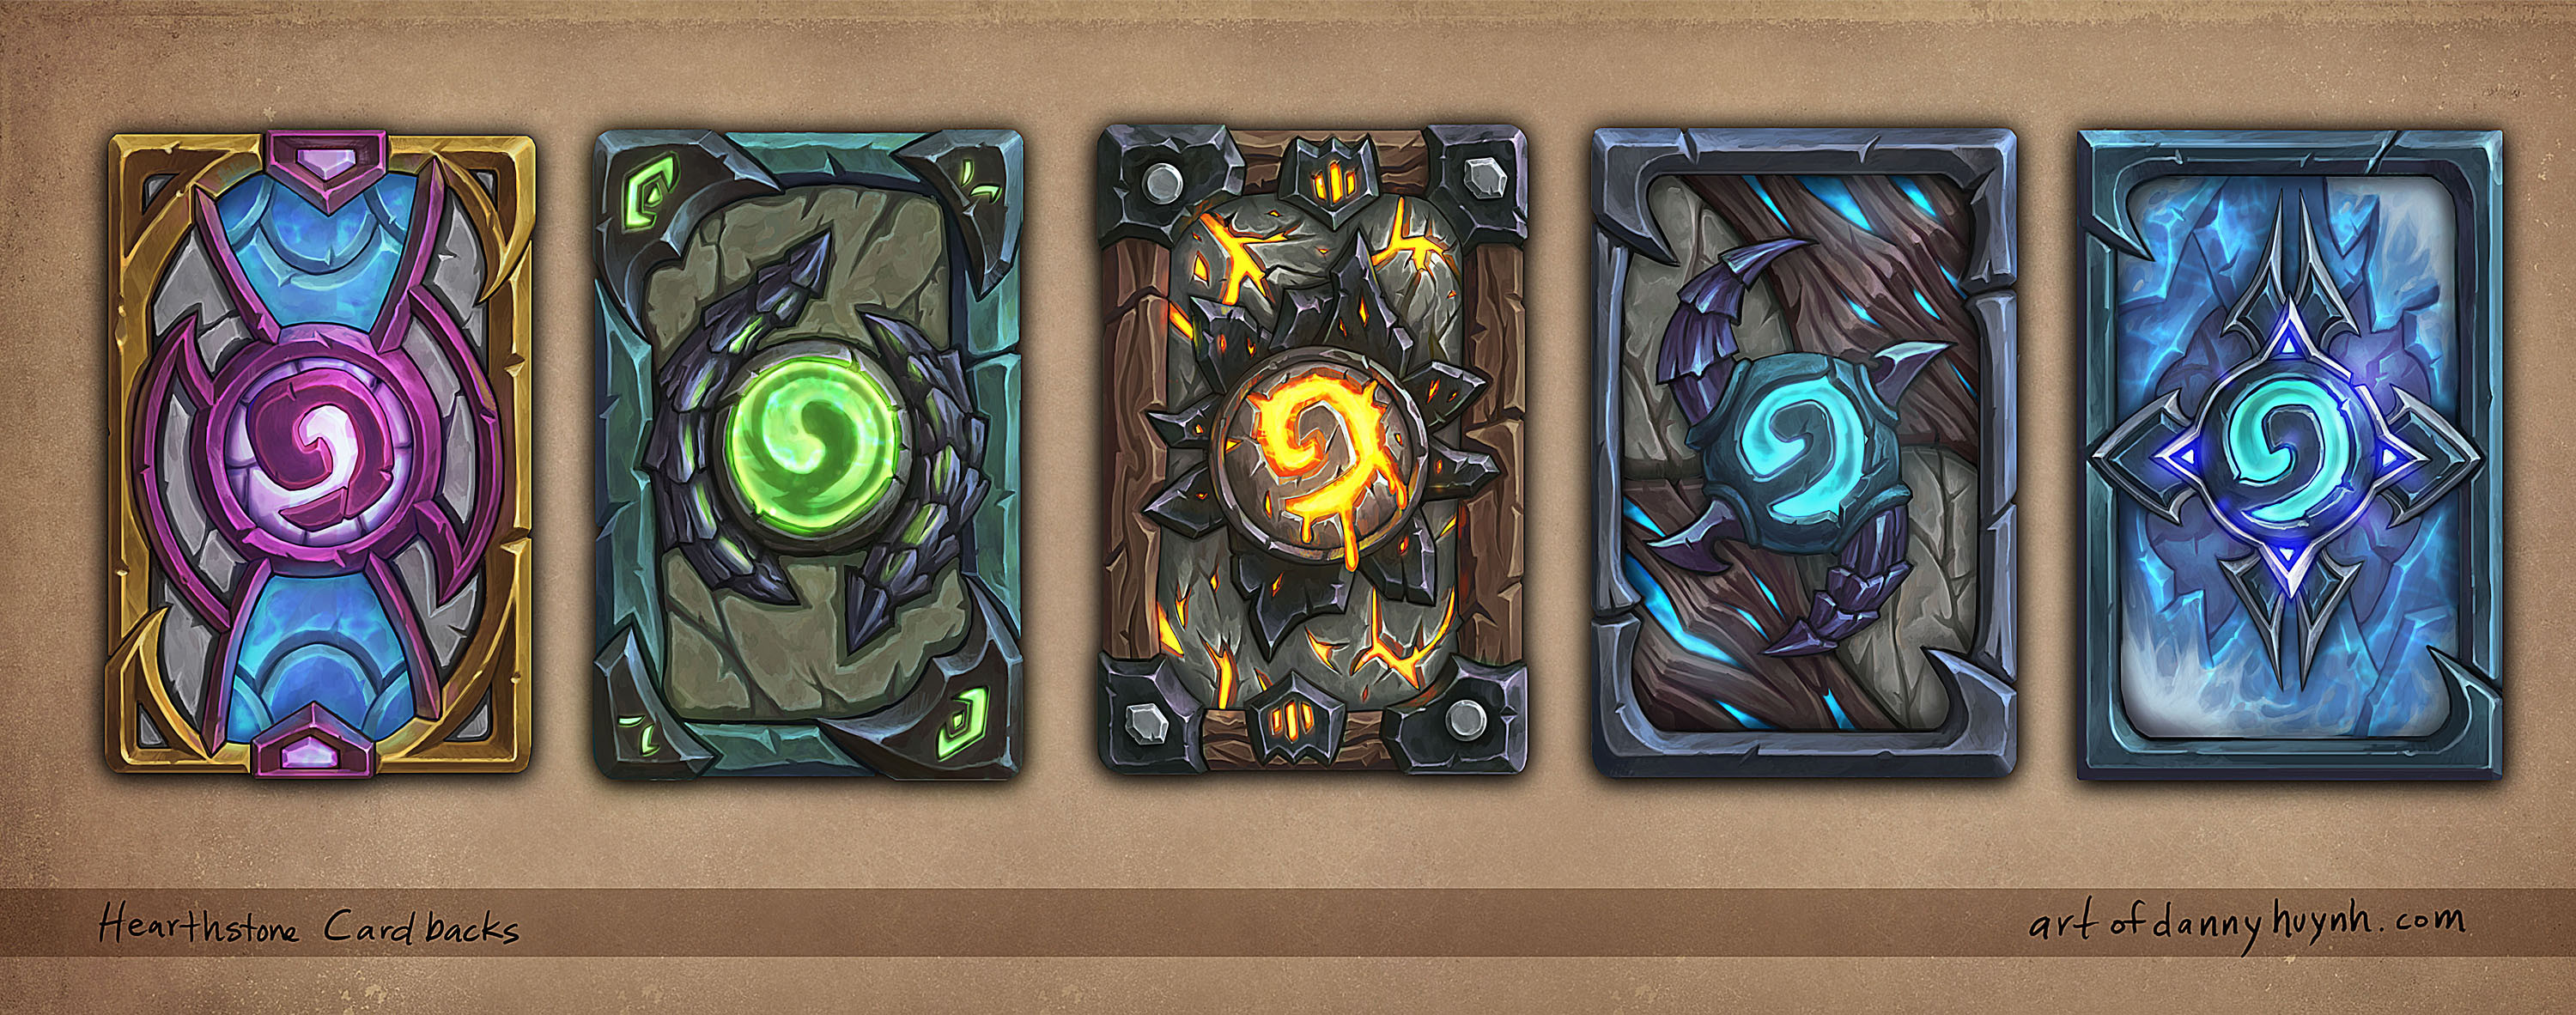 Some cardback designs for different themes. Check out the gif here. http://imgur.com/CgeLdPP